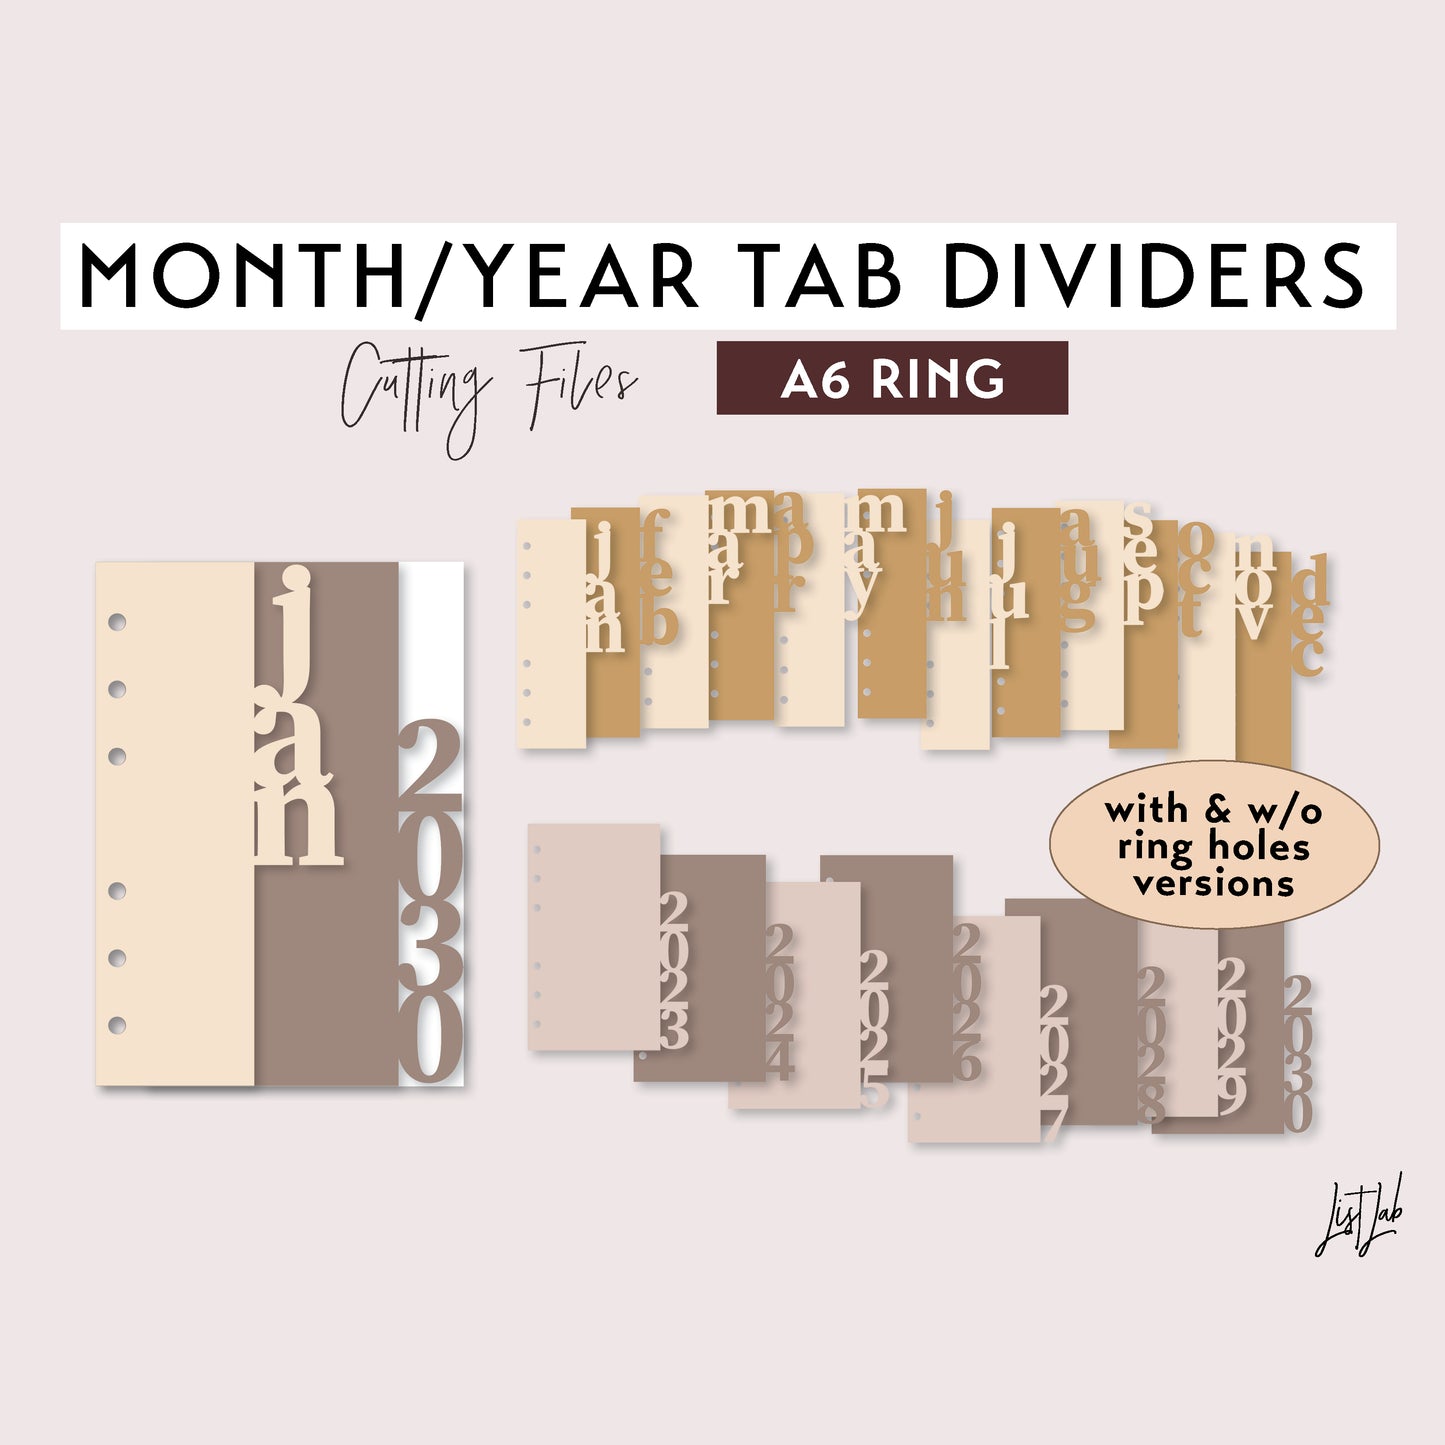 A6 Ring MONTH & YEAR DIVIDERS Cutting Files Set